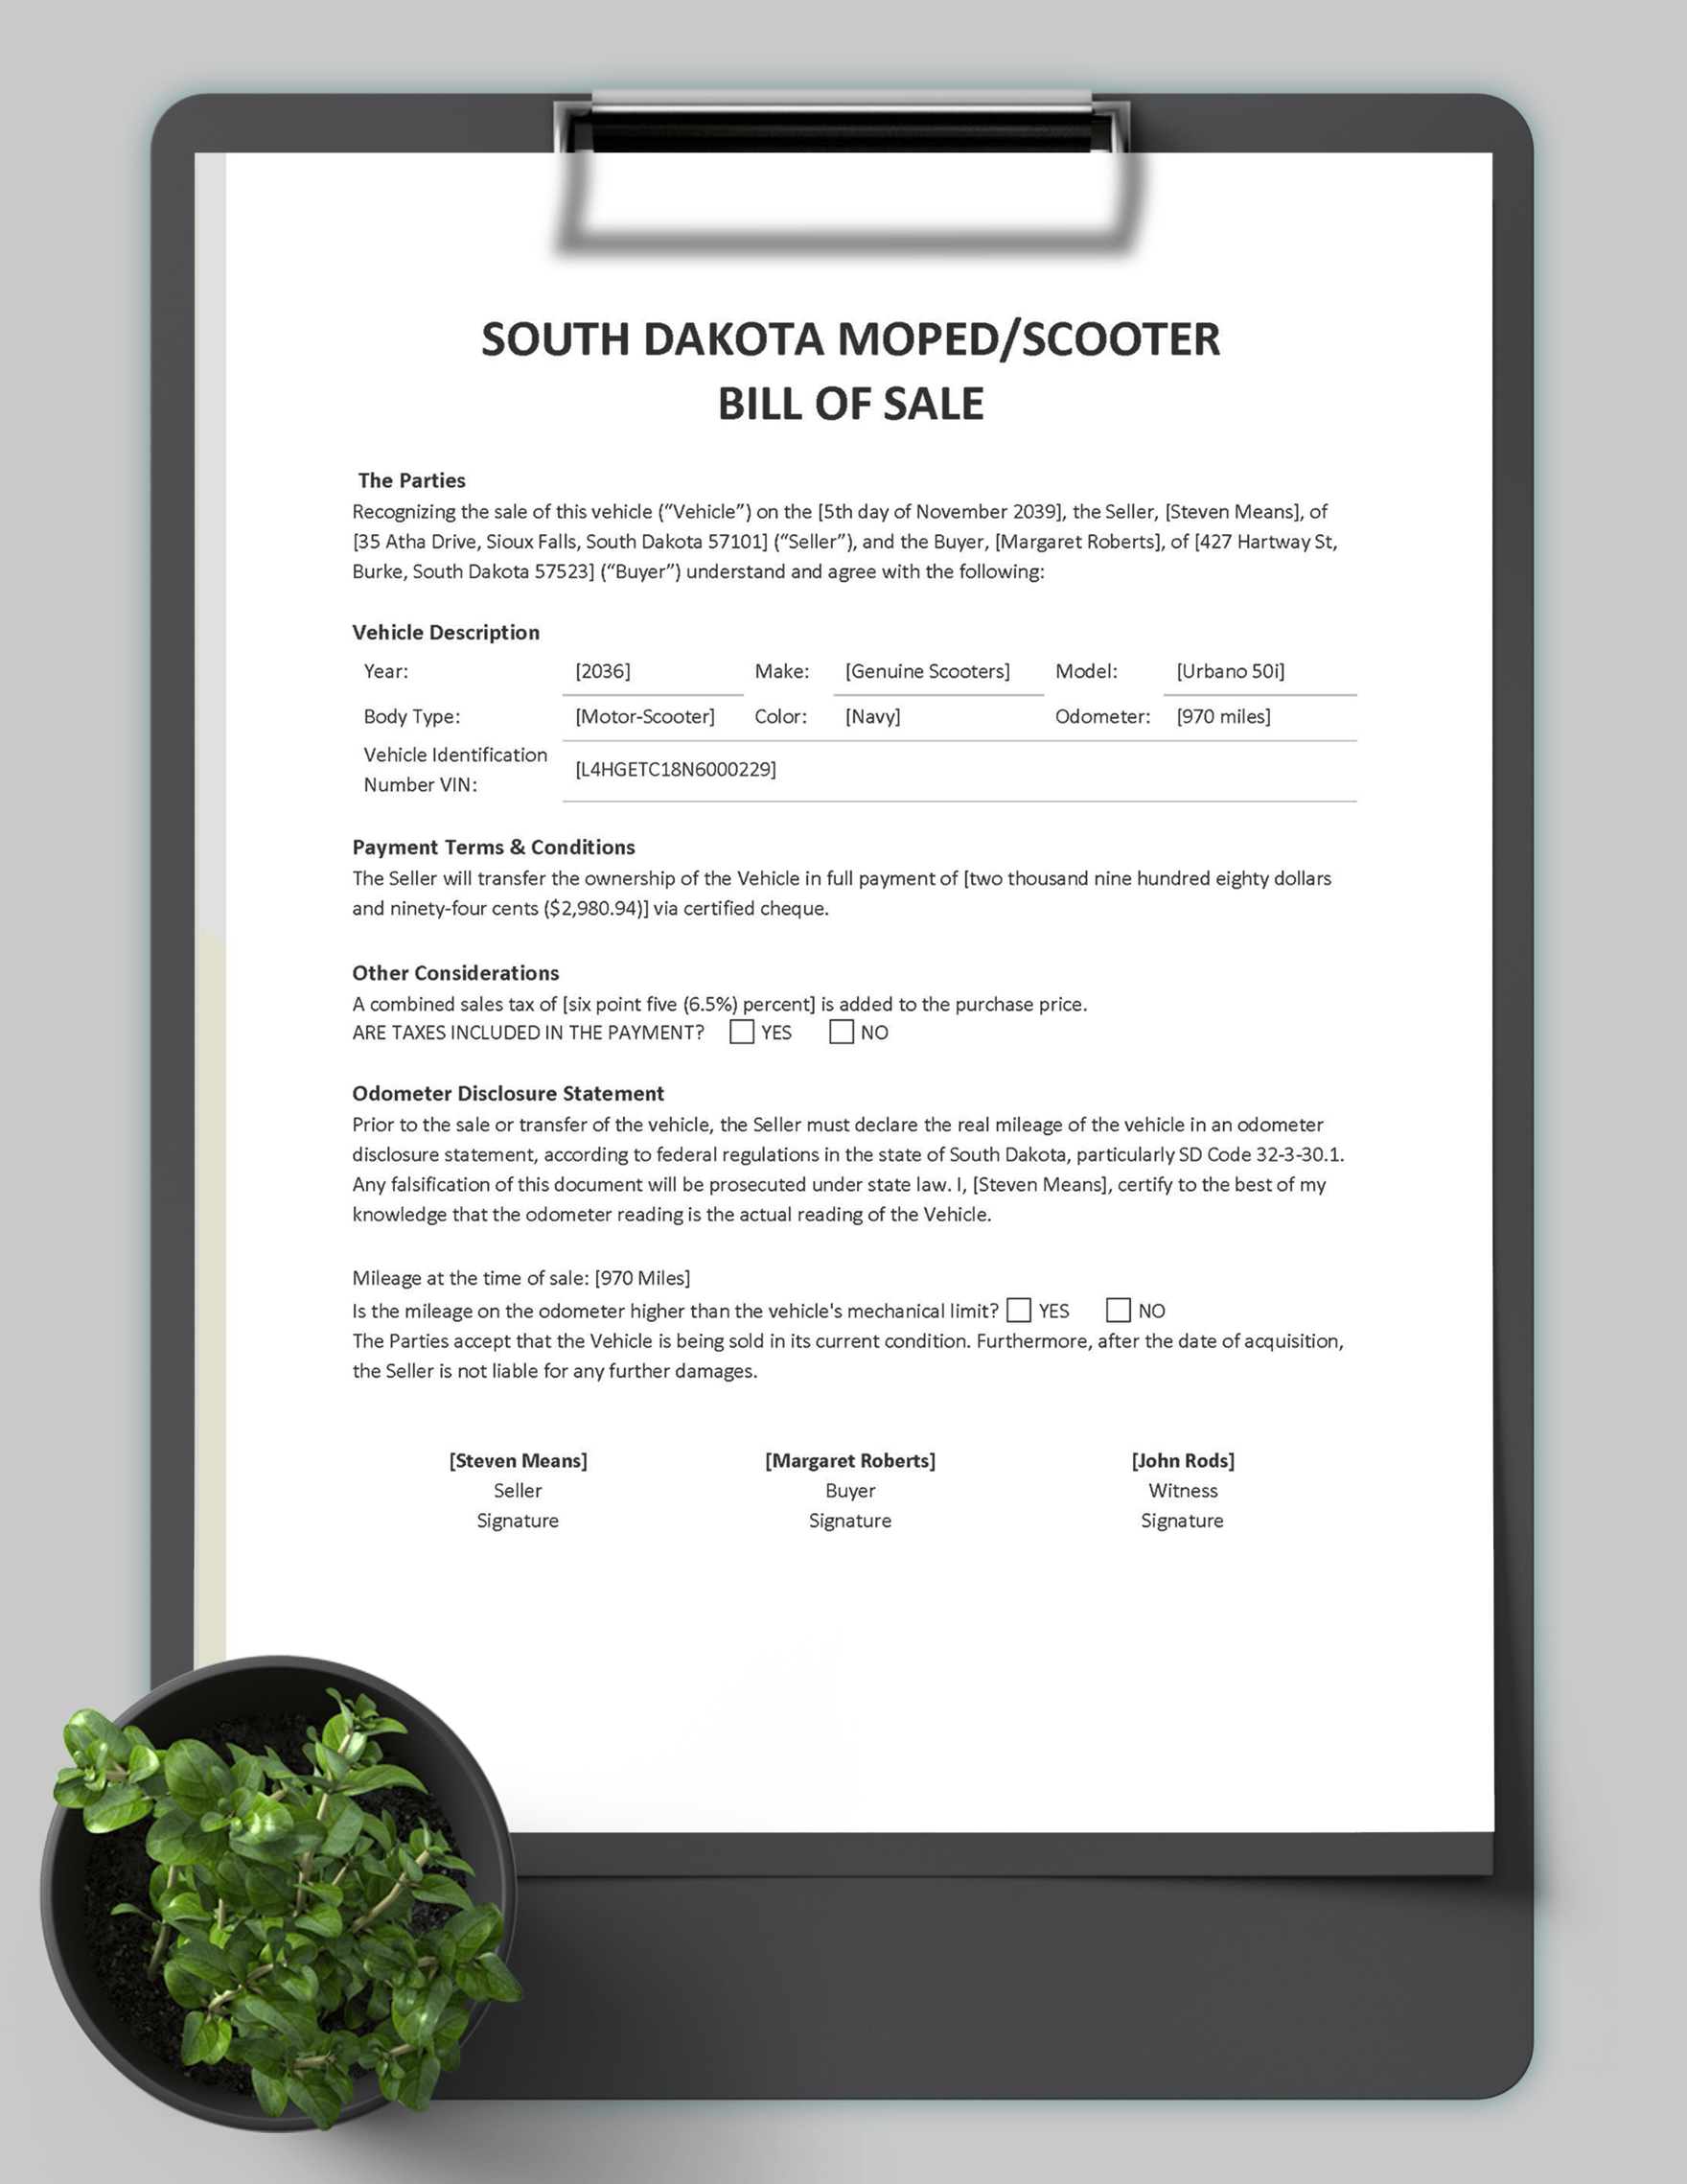 South Dakota Moped / Scooter Bill of Sale Form Template